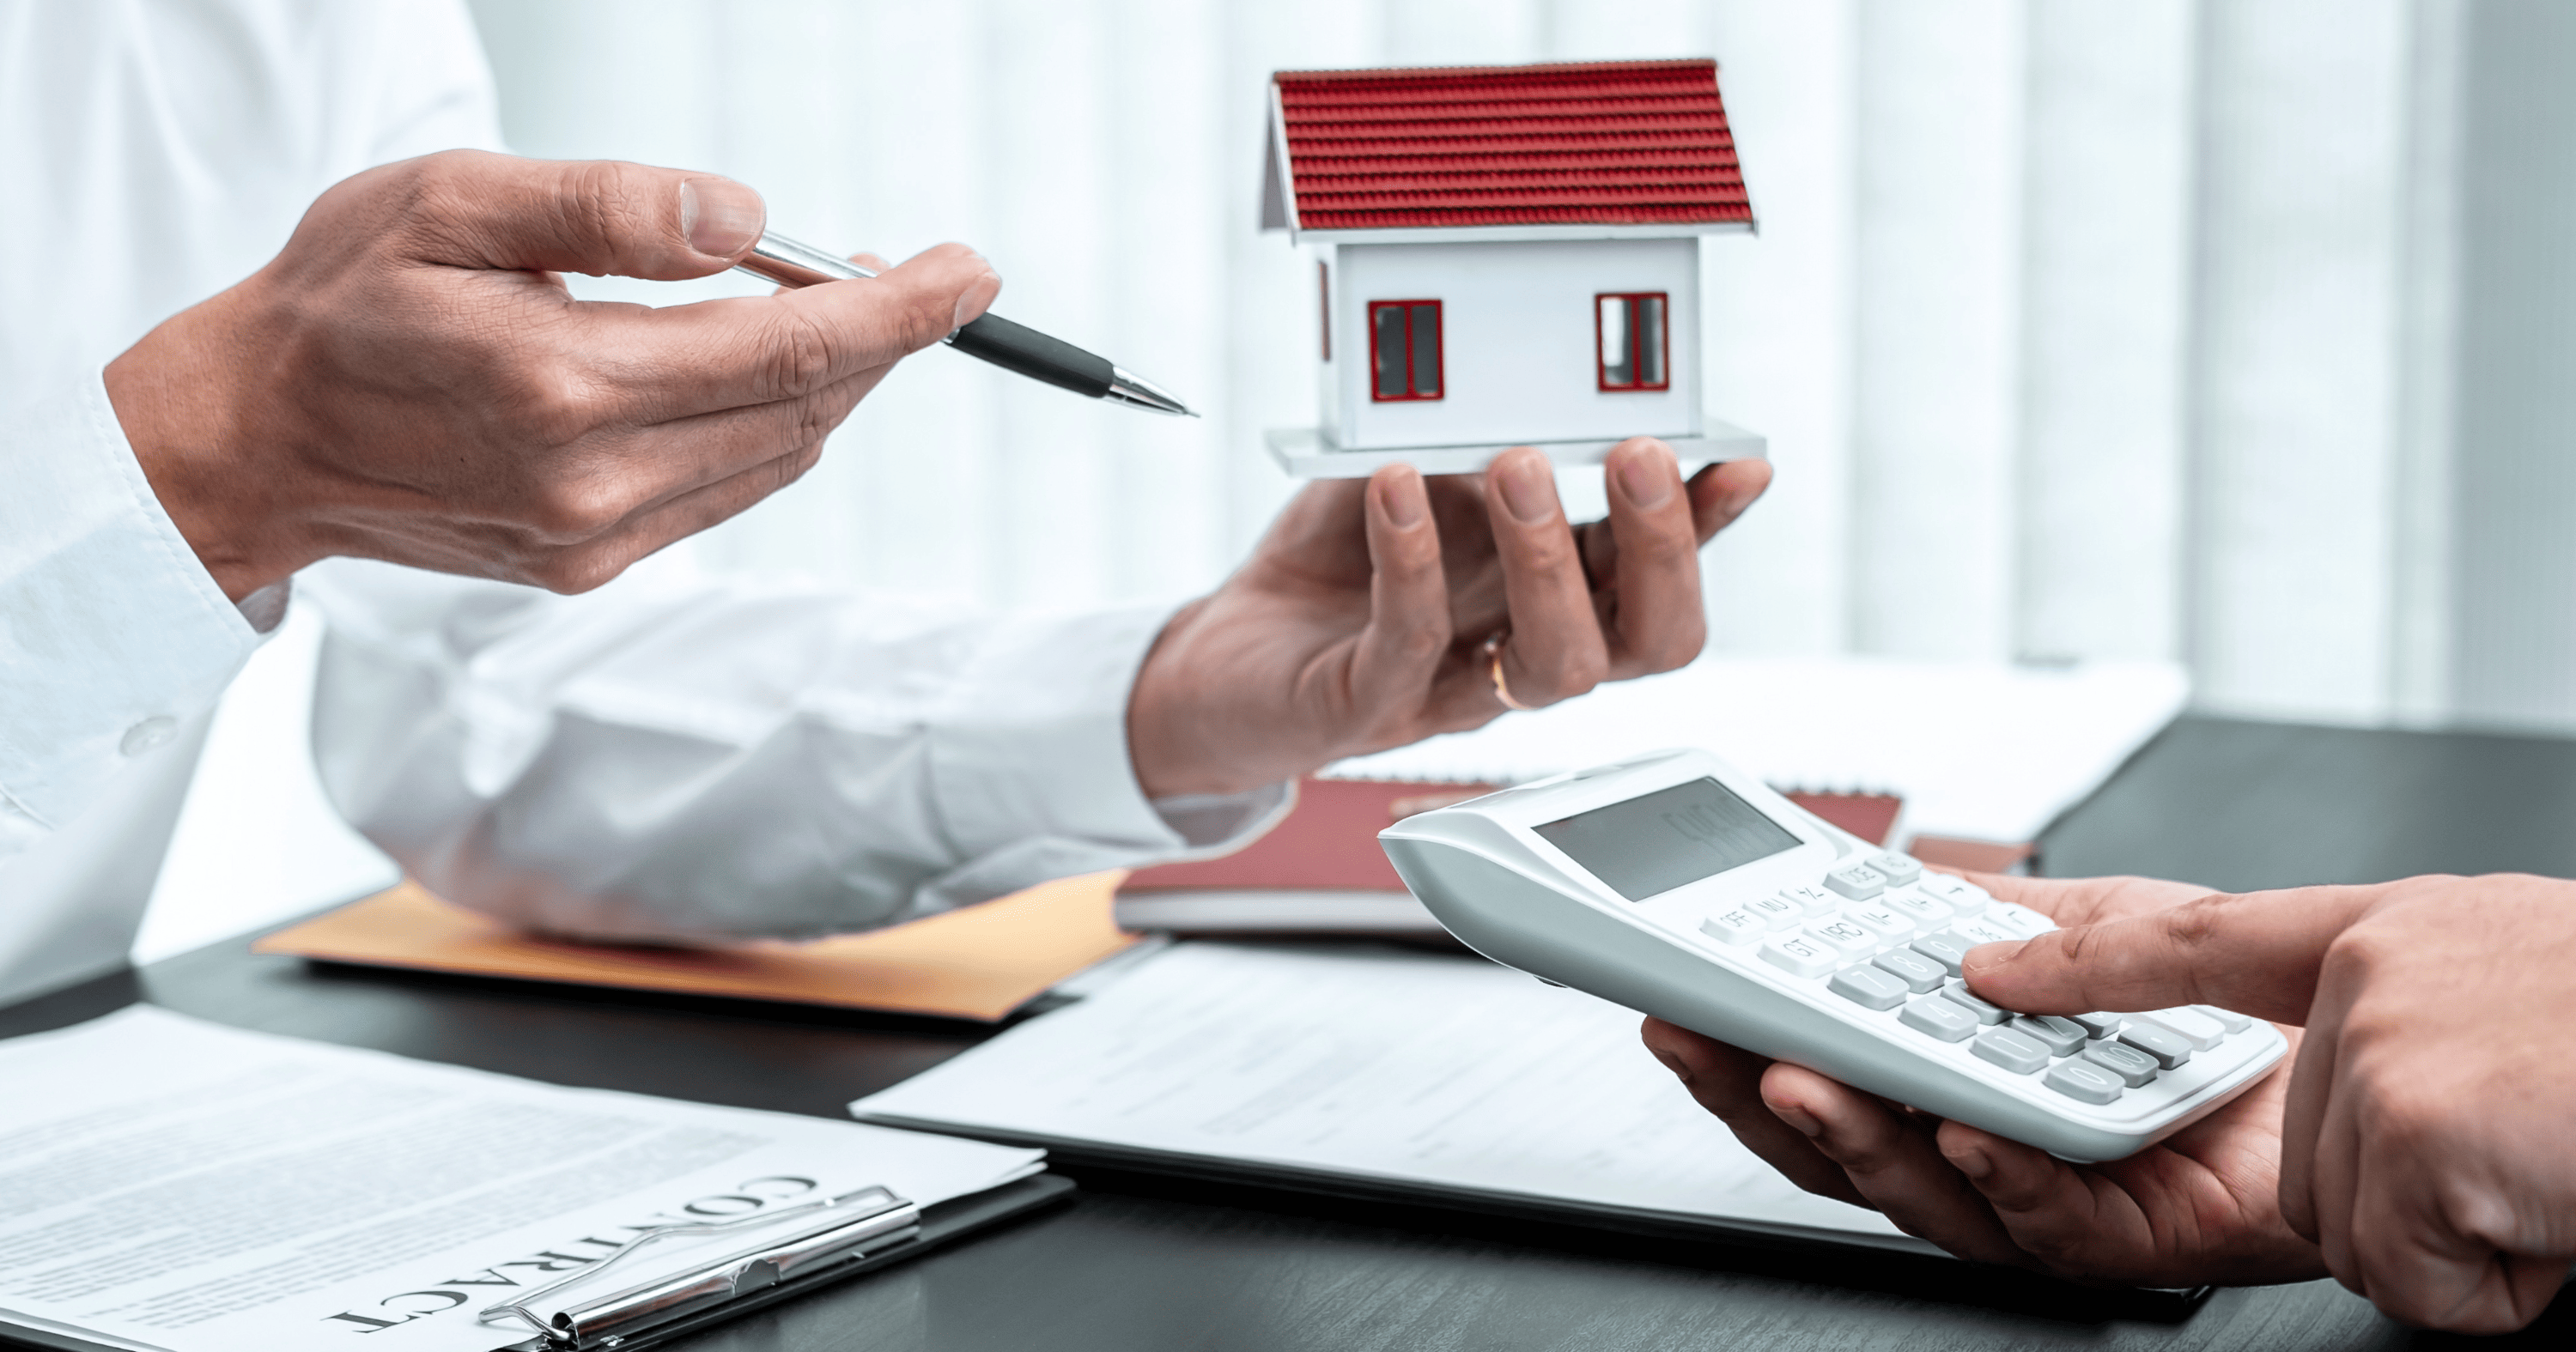 A stock image of a model house and a calculator. Find a Shared Ownership mortgage with Censeo Financial - Share to Buy's broker partner!